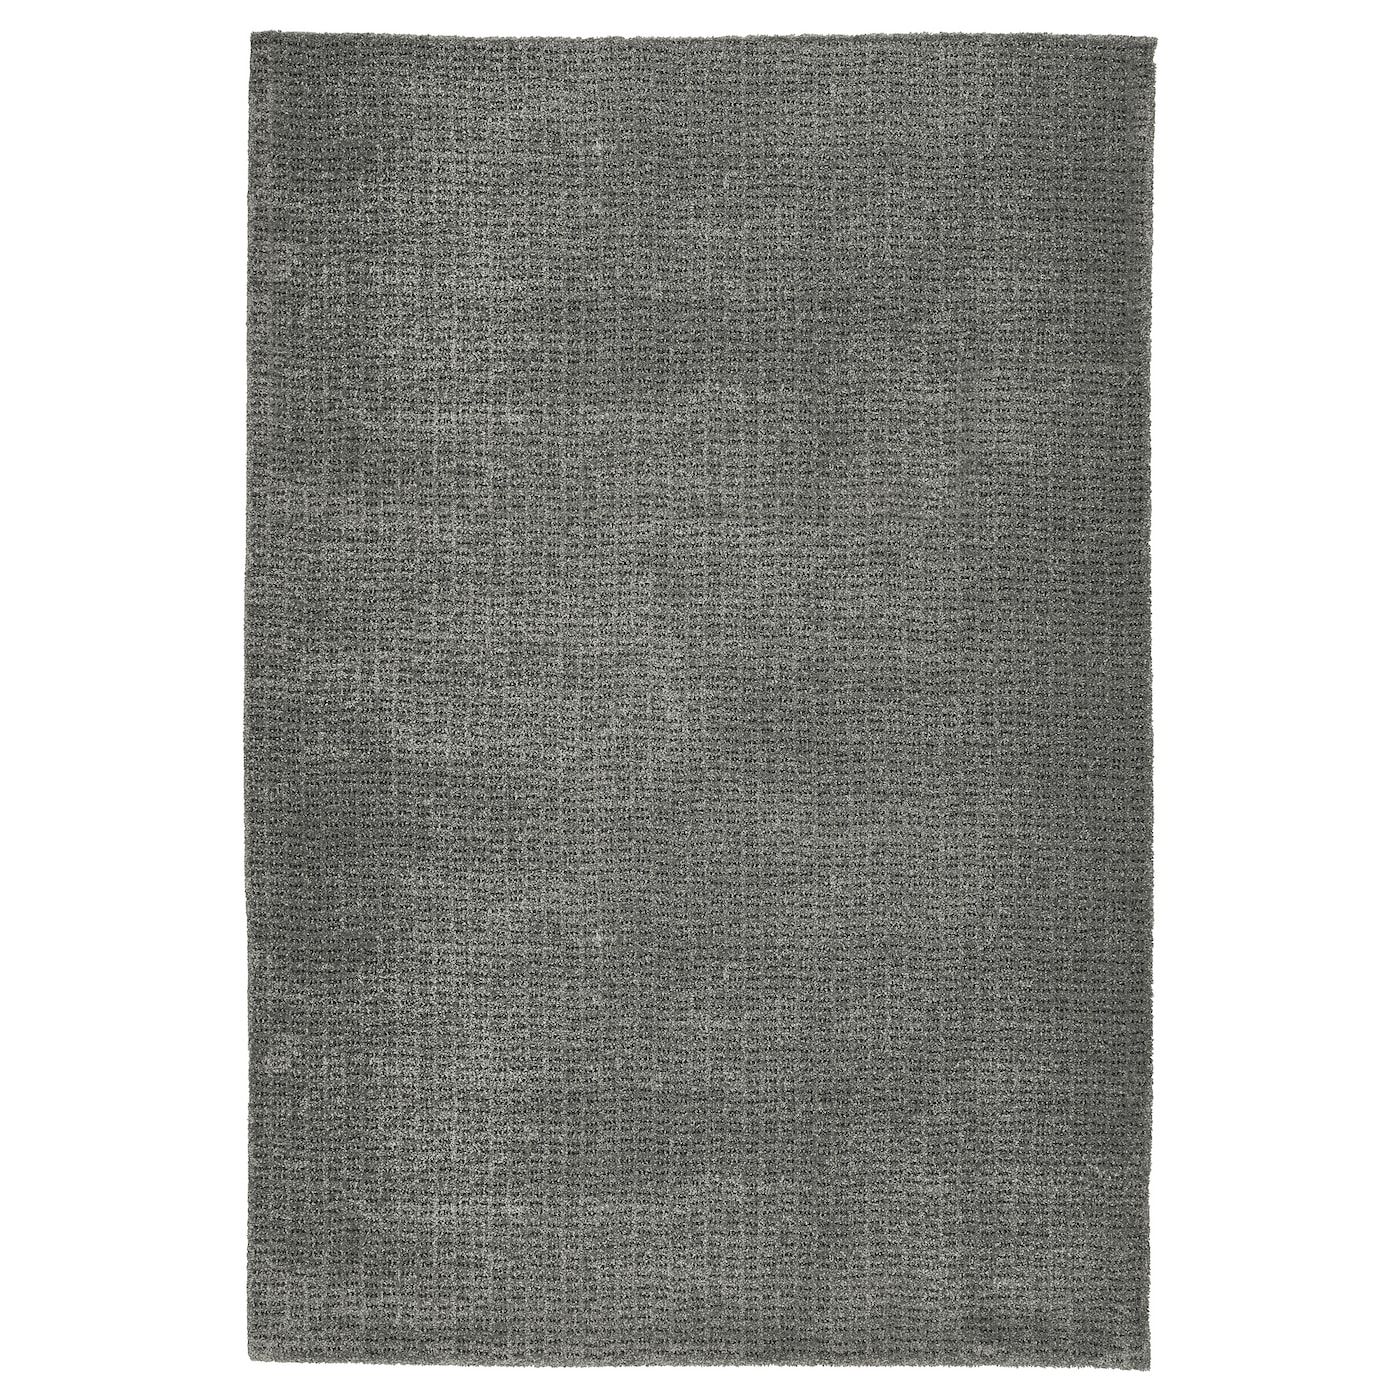 Langsted Rug, Low Pile, Light Gray, 133X195 Cm (4'4"X6'5") – Ikea Ca Intended For Light Gray Rugs (View 12 of 15)